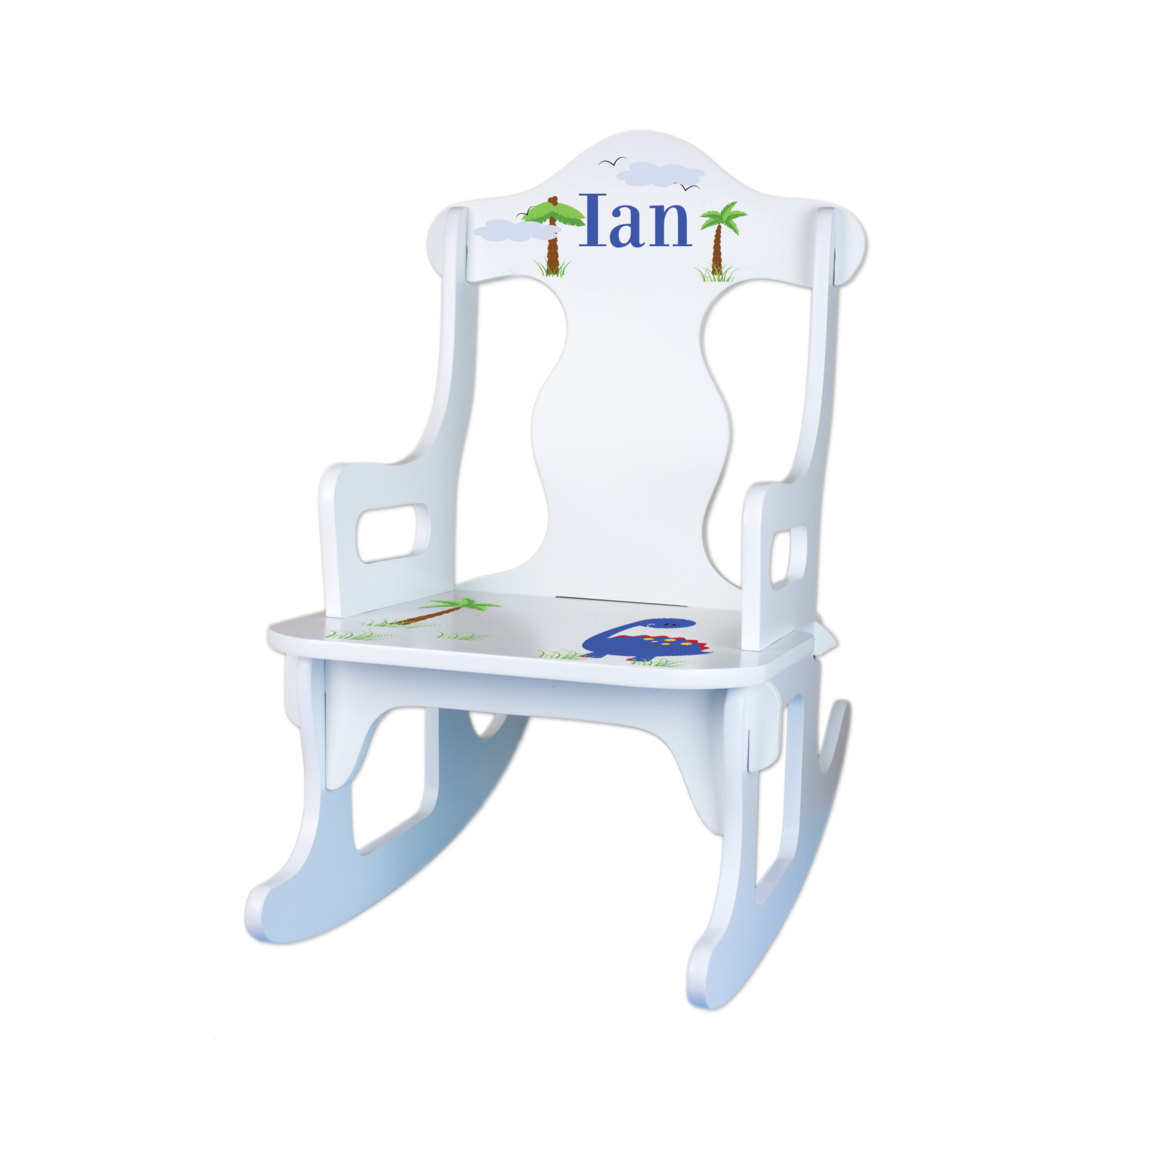 Personalized Kids Rocking Chair
 Personalized Kids Rocking Chair Custom White by WizkickGifts